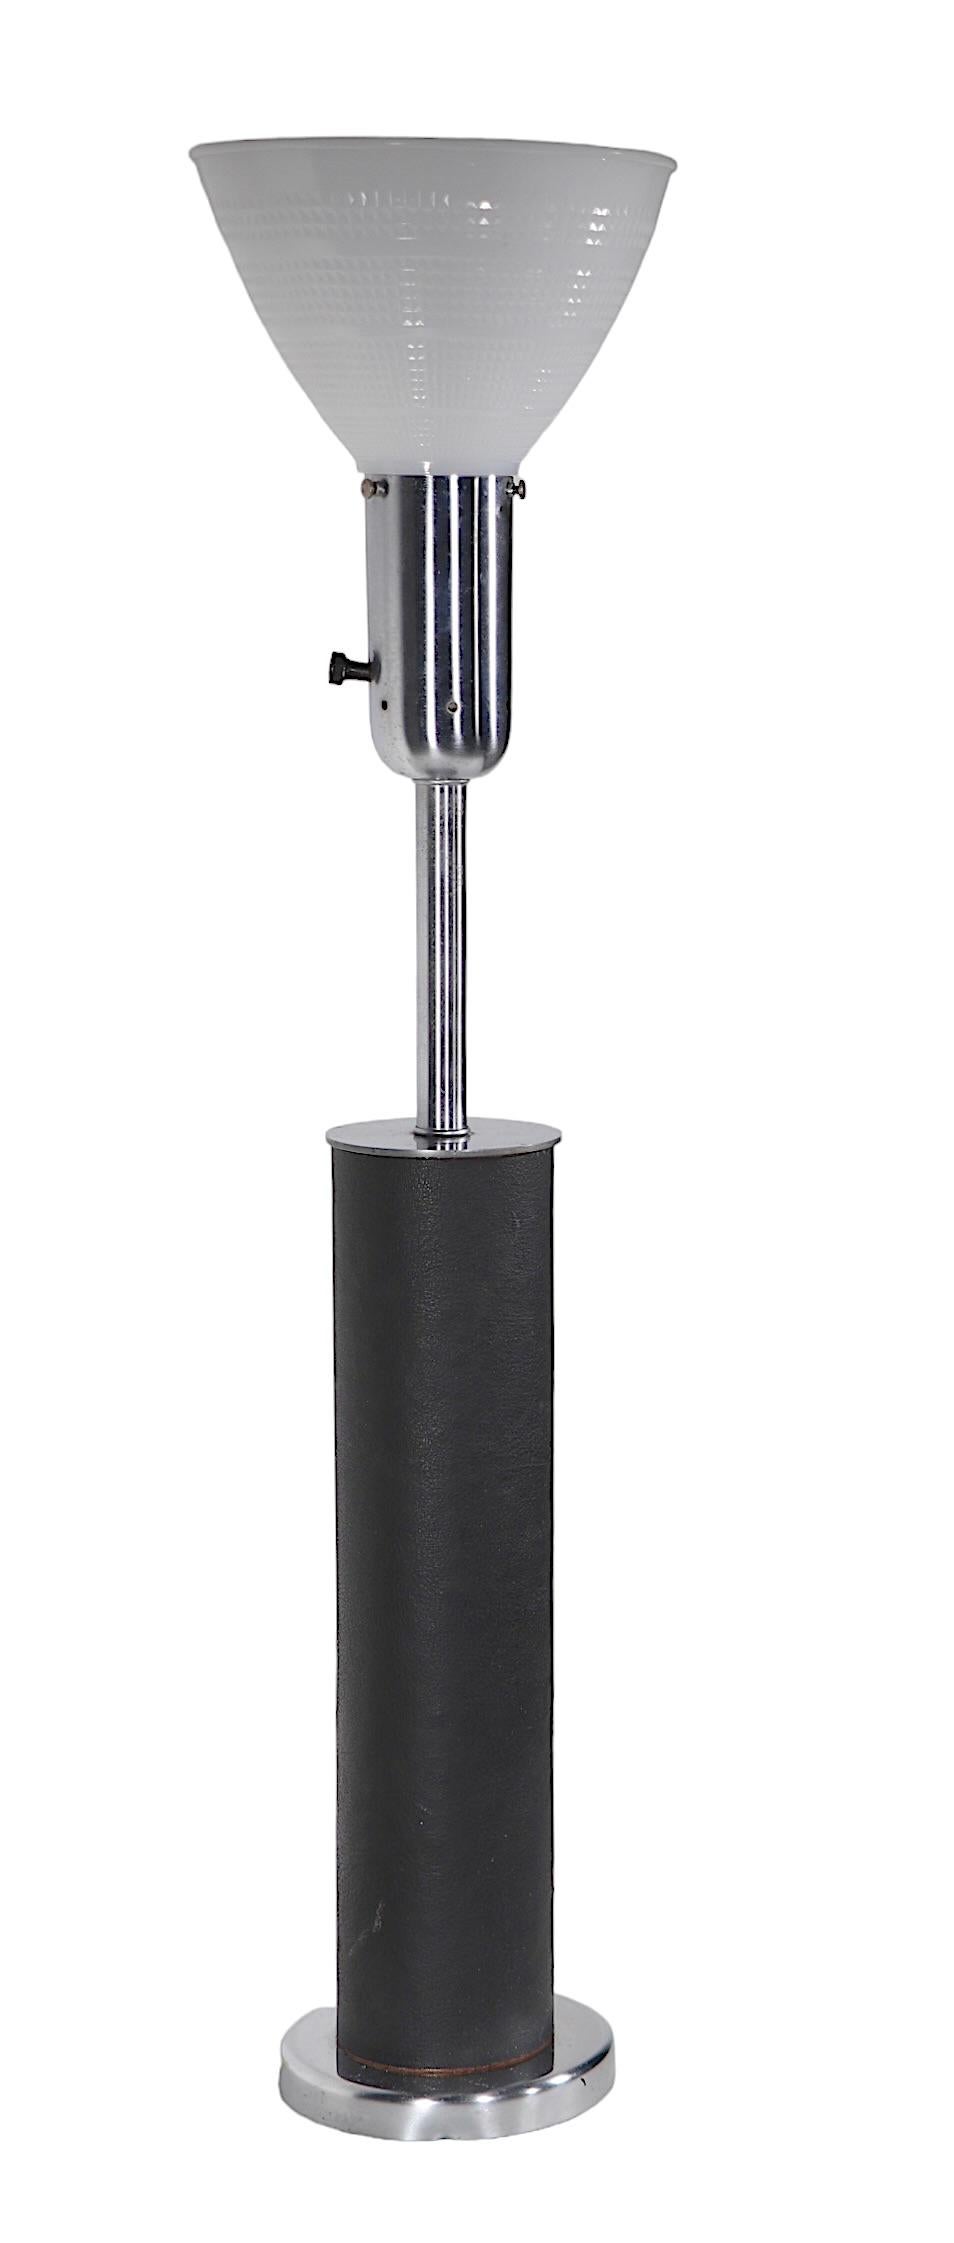 Chic and sophisticated Modernist School table lamp by Walter Von Nessen, made by Nessen Studios. The cylindrical body is wrapped in black leather,  the base is chrome and the top is brushed steel, with a white glass diffuser shade included. Circa